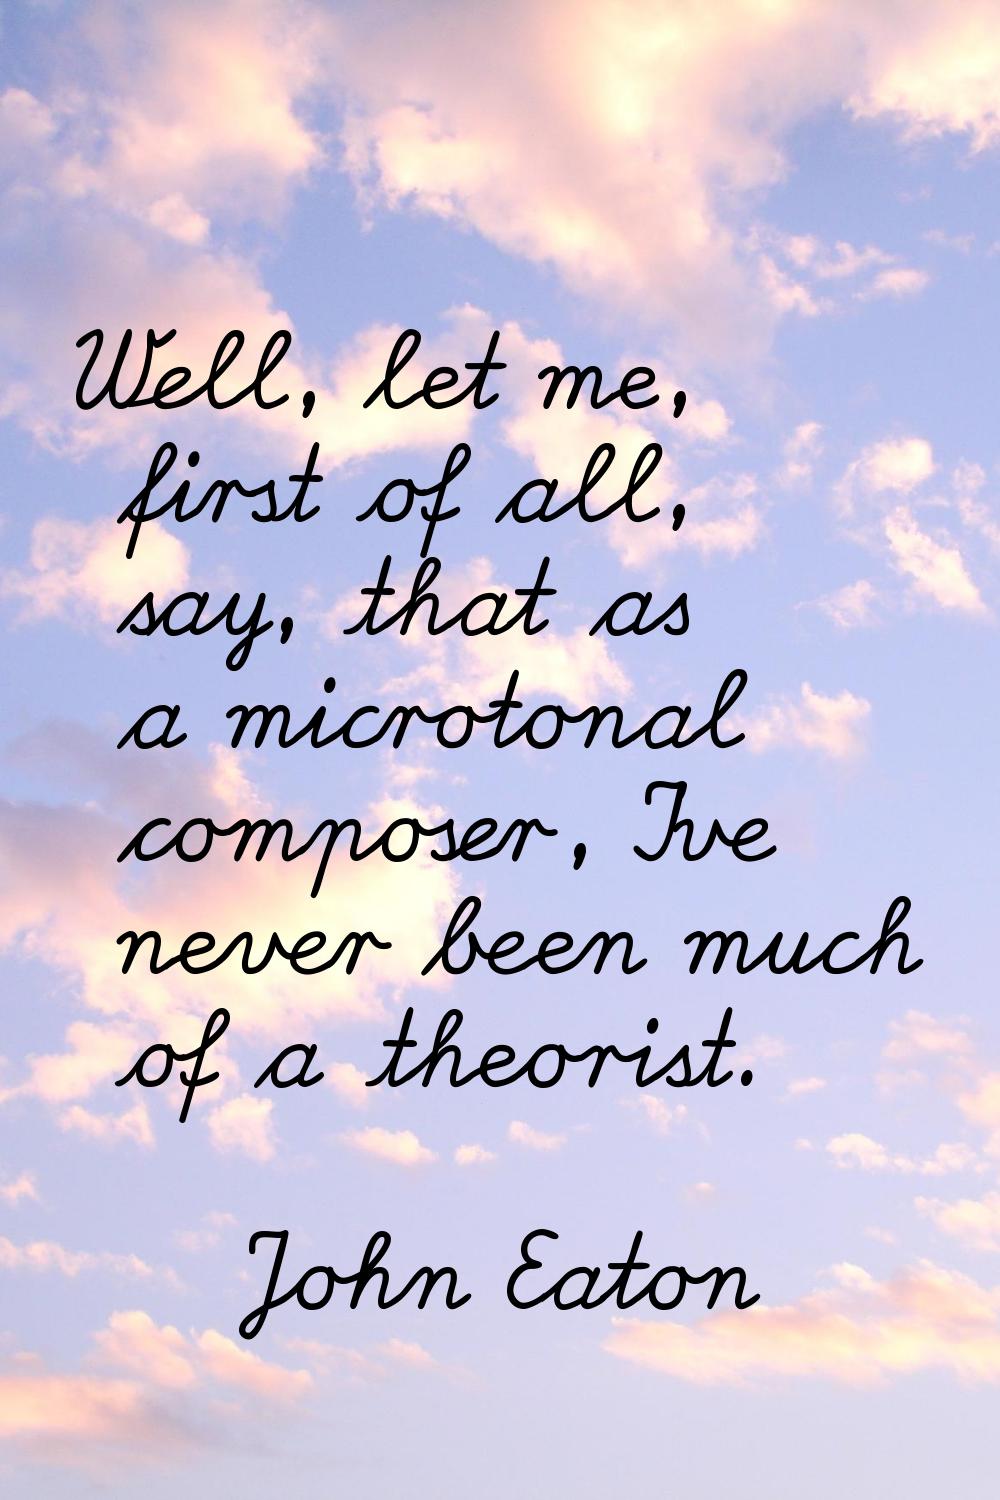 Well, let me, first of all, say, that as a microtonal composer, I've never been much of a theorist.